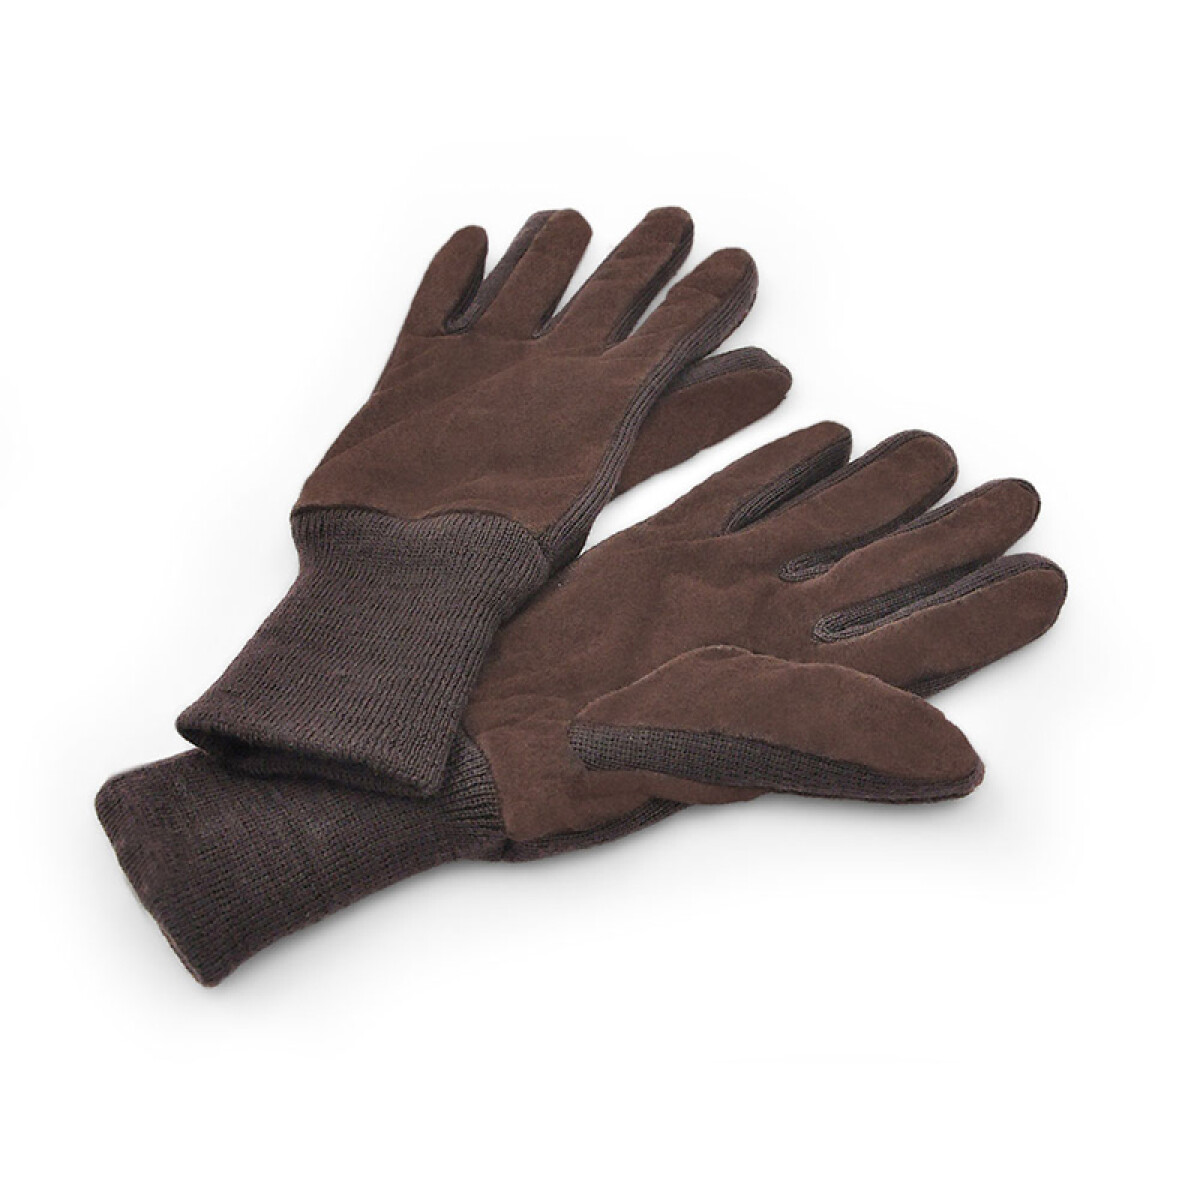 GUANTES ALTANO - CHOCOLATE TALLE M 